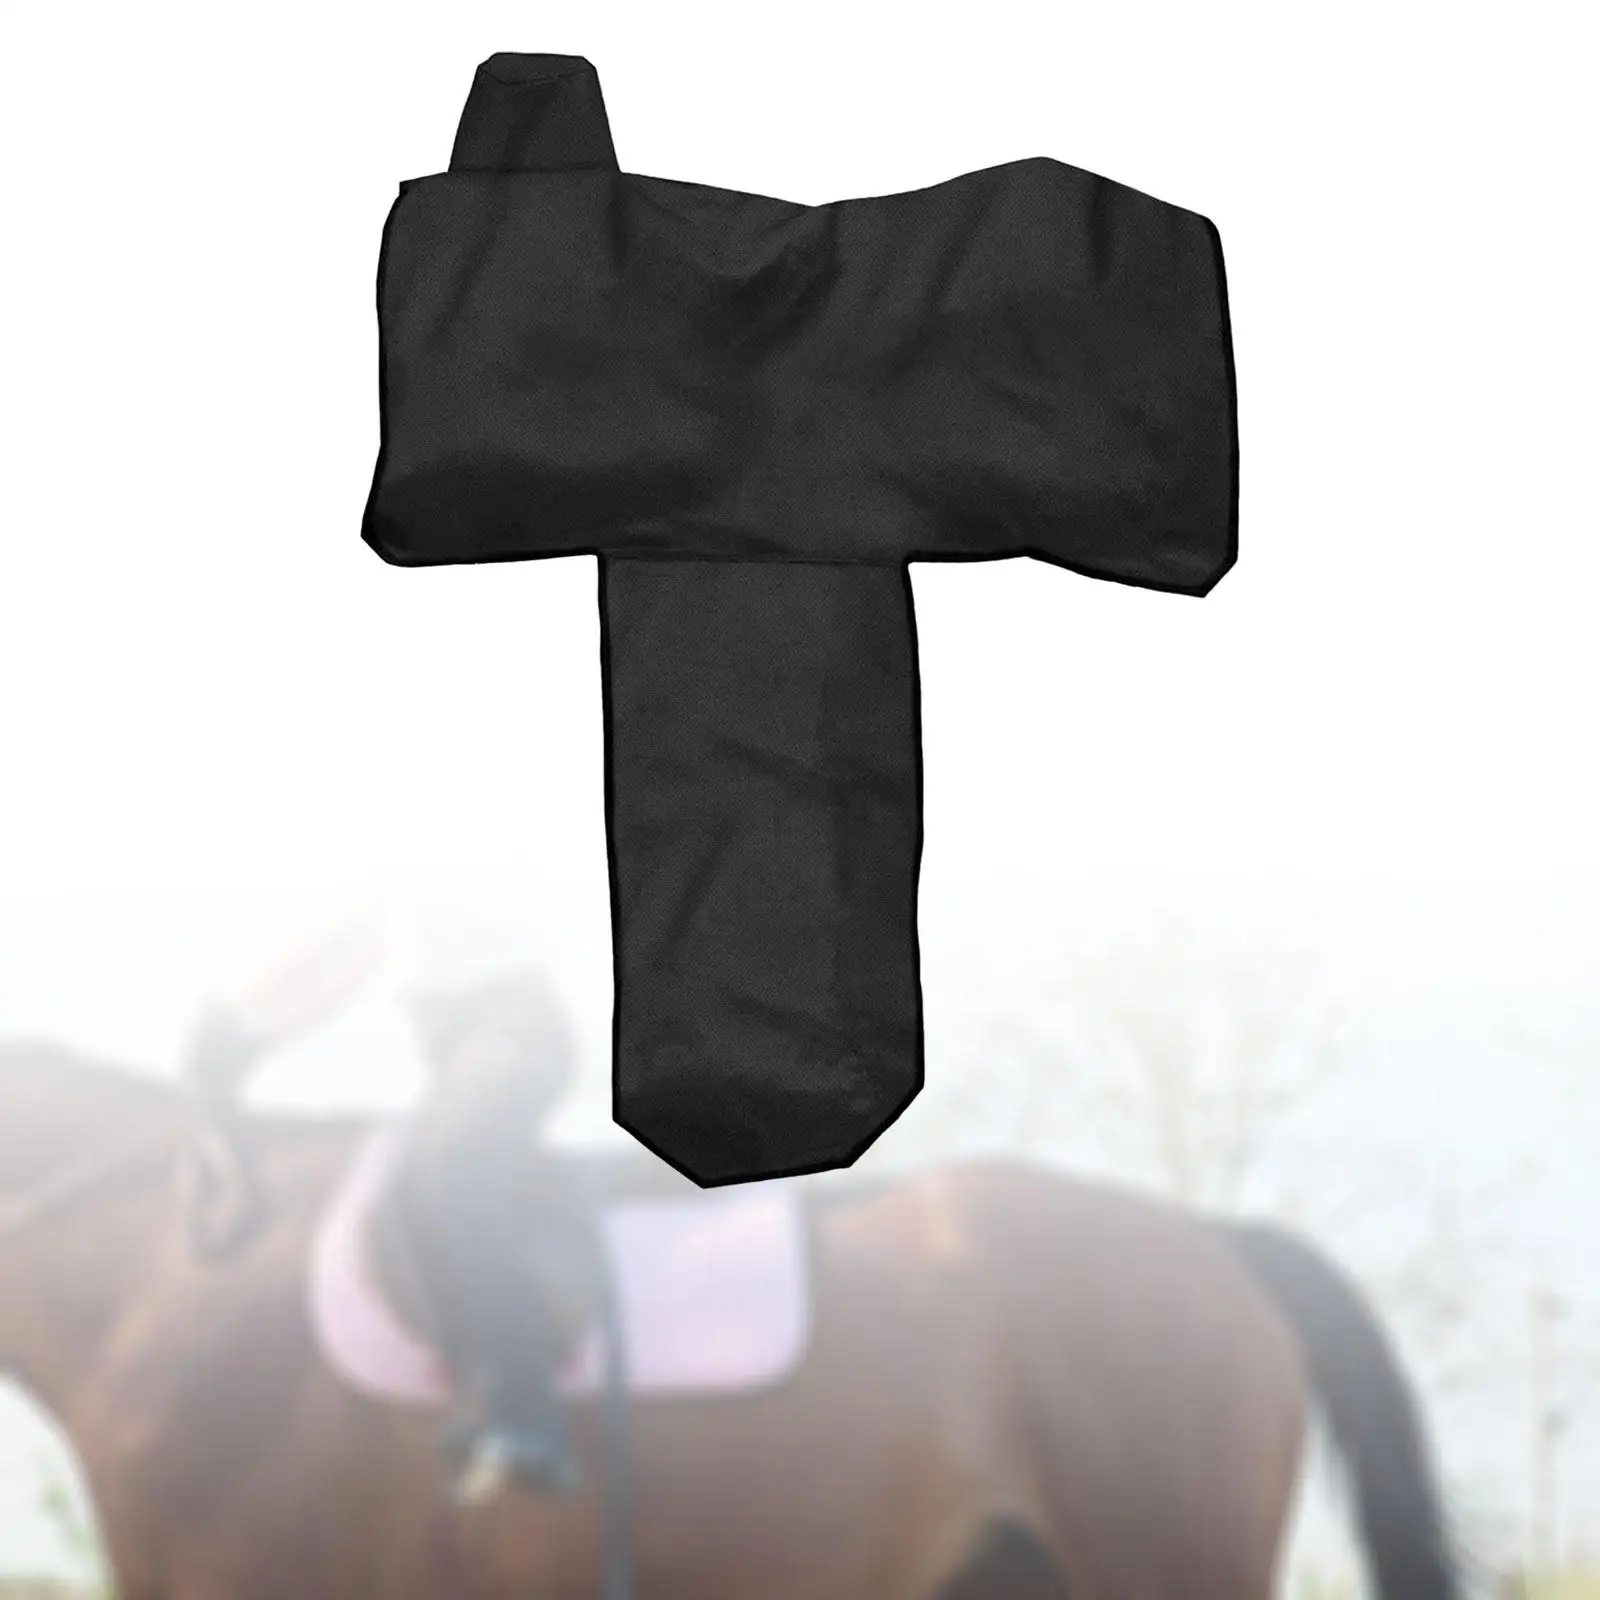 Western Full Saddle Cover Waterproof Oxford Cloth Practical Black Protective